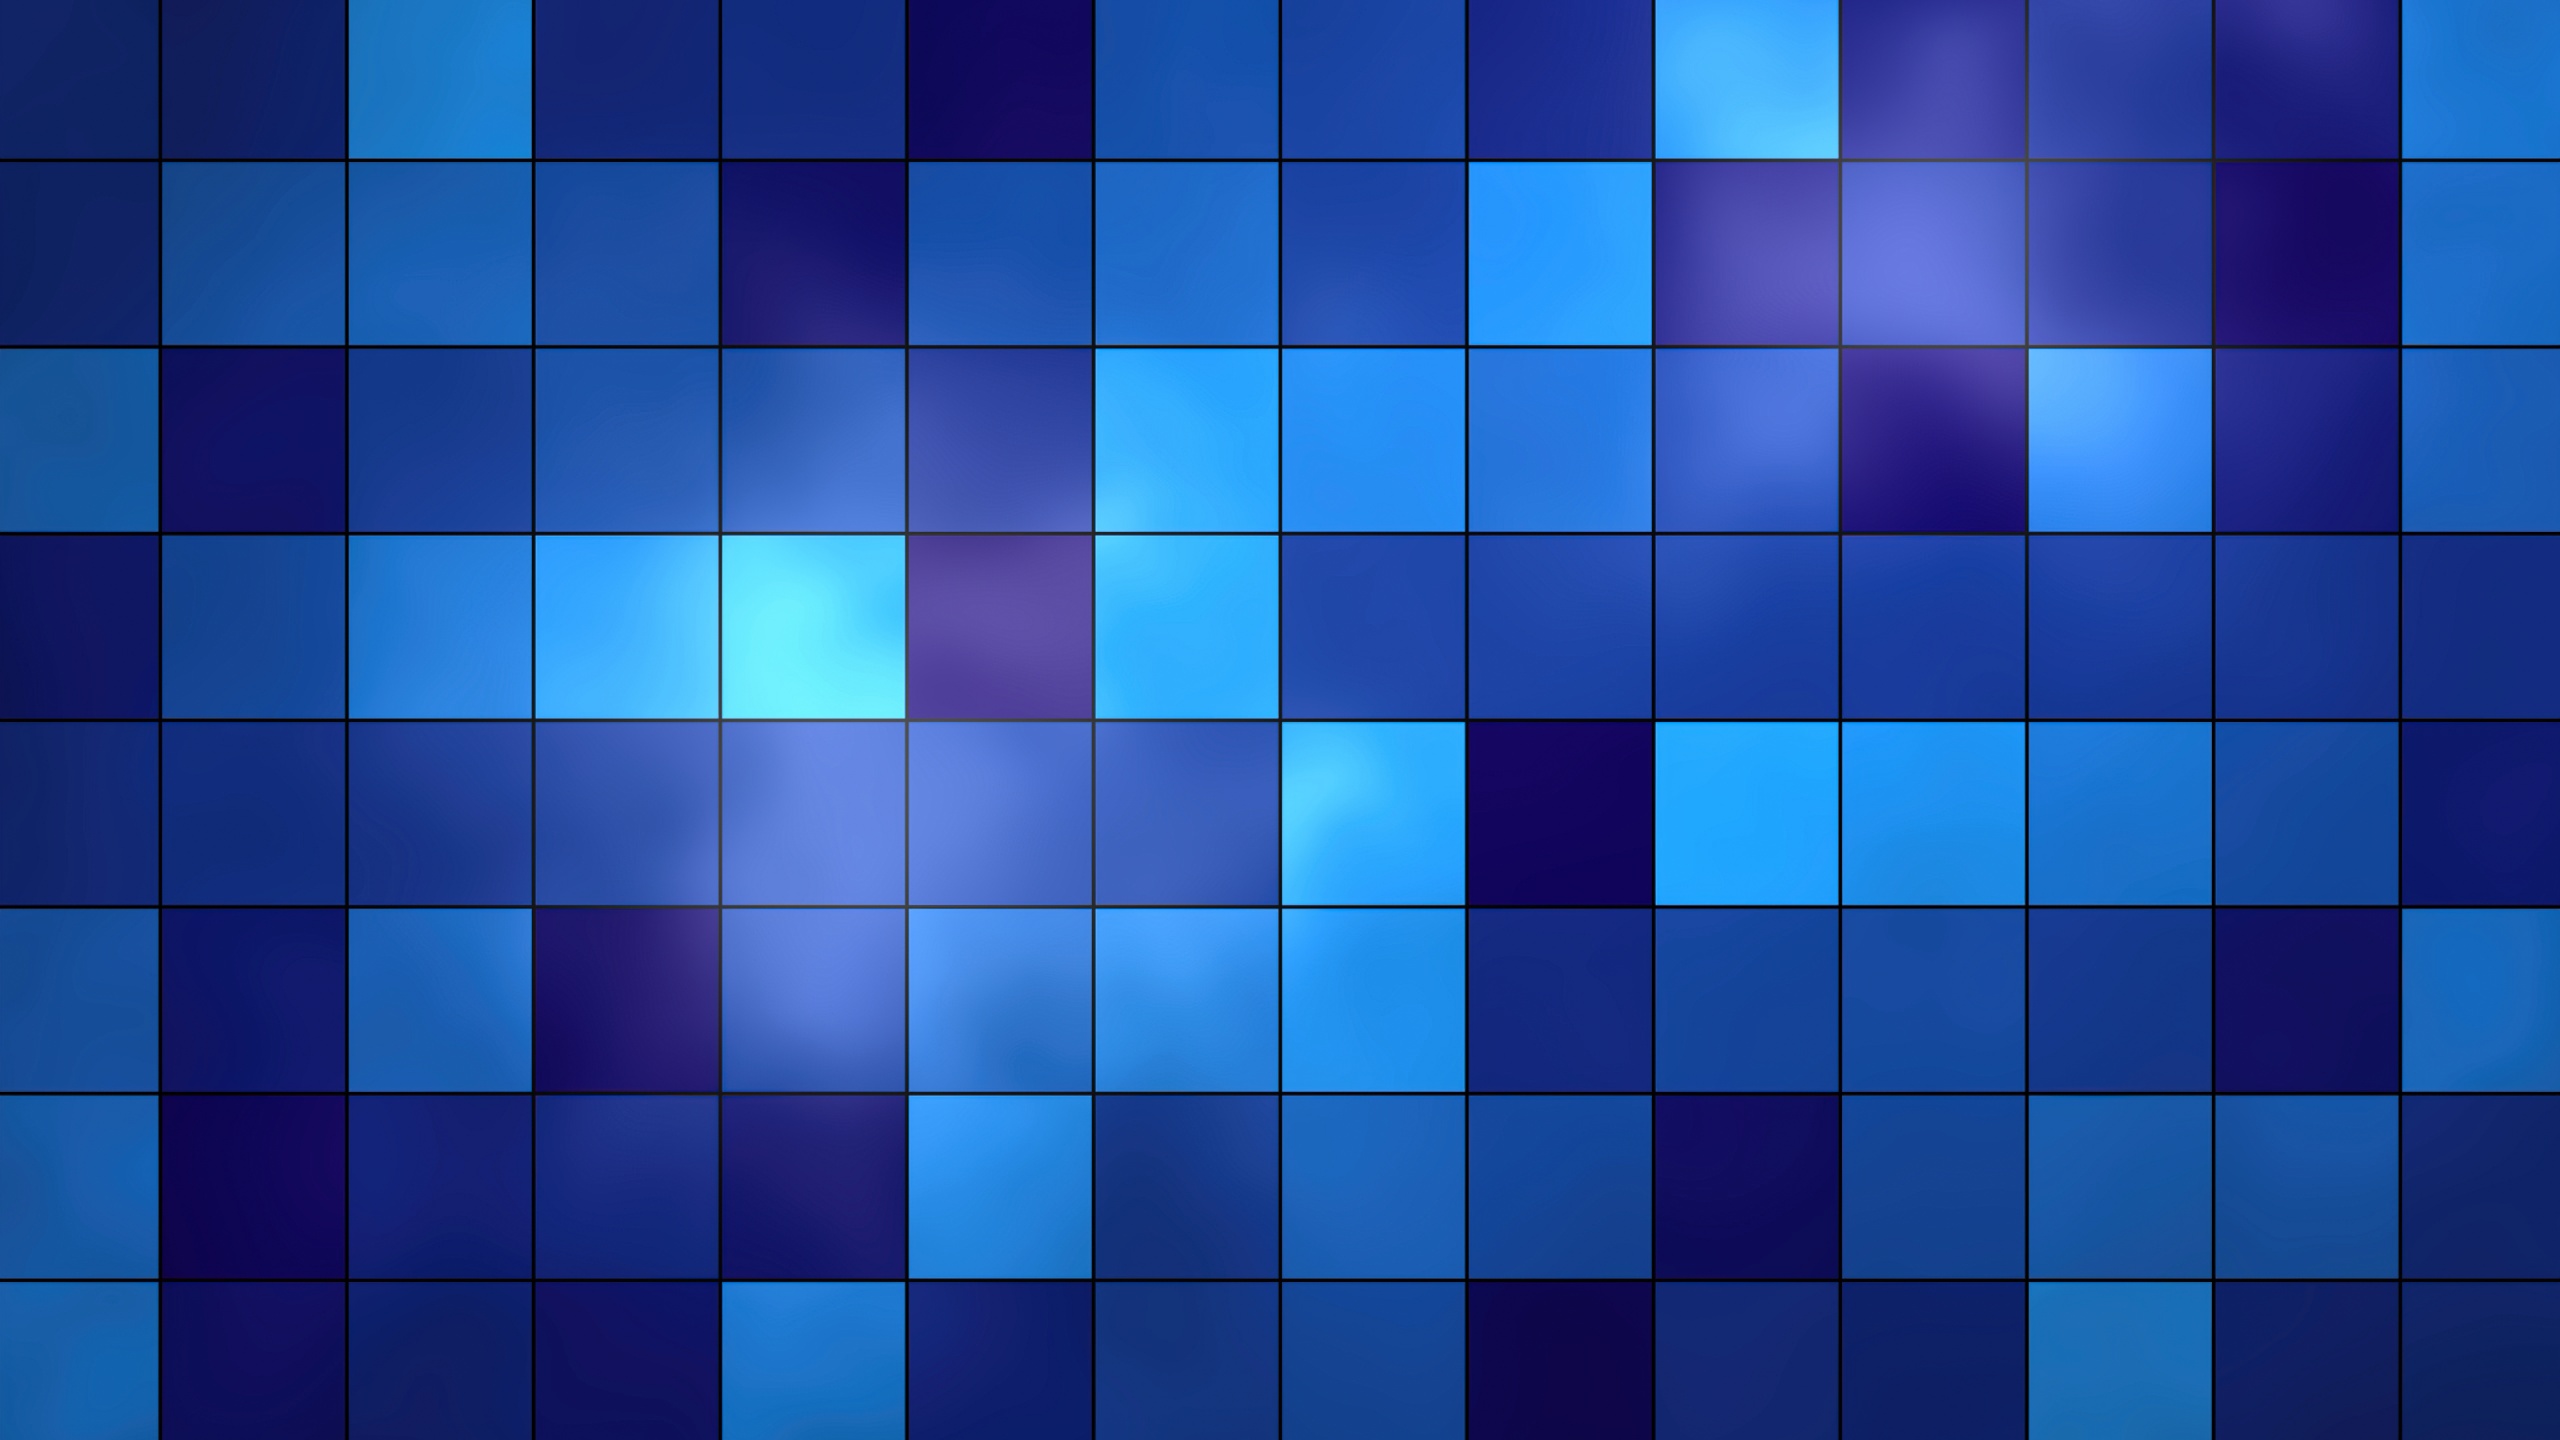 cold blue backgrounds